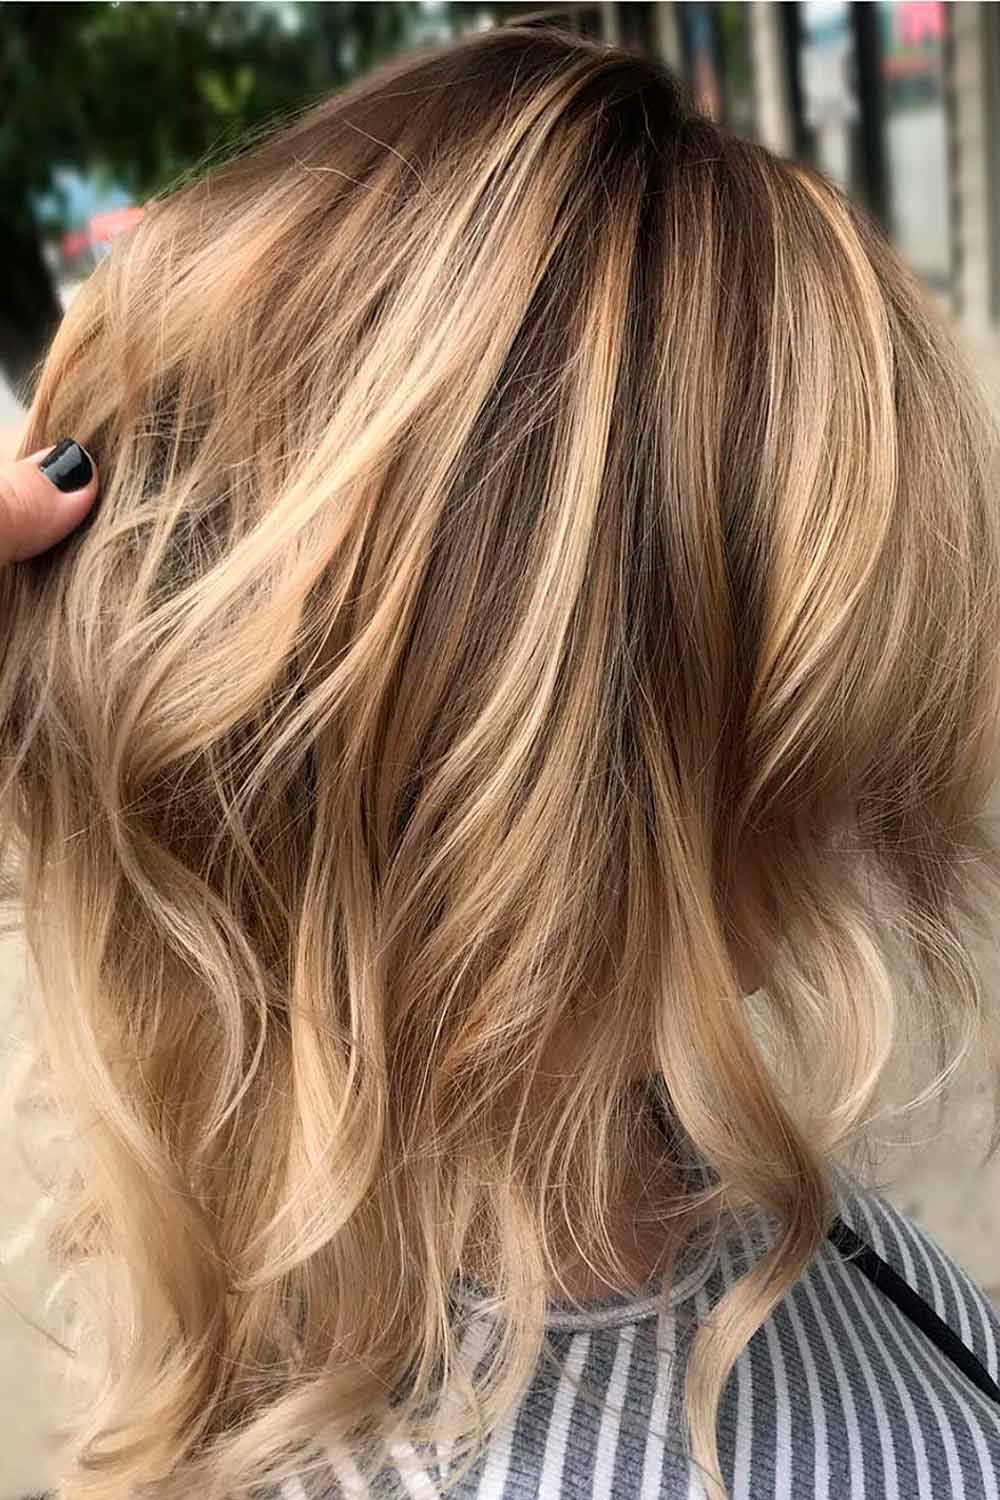 The Perfect Combination of Blonde & Brown